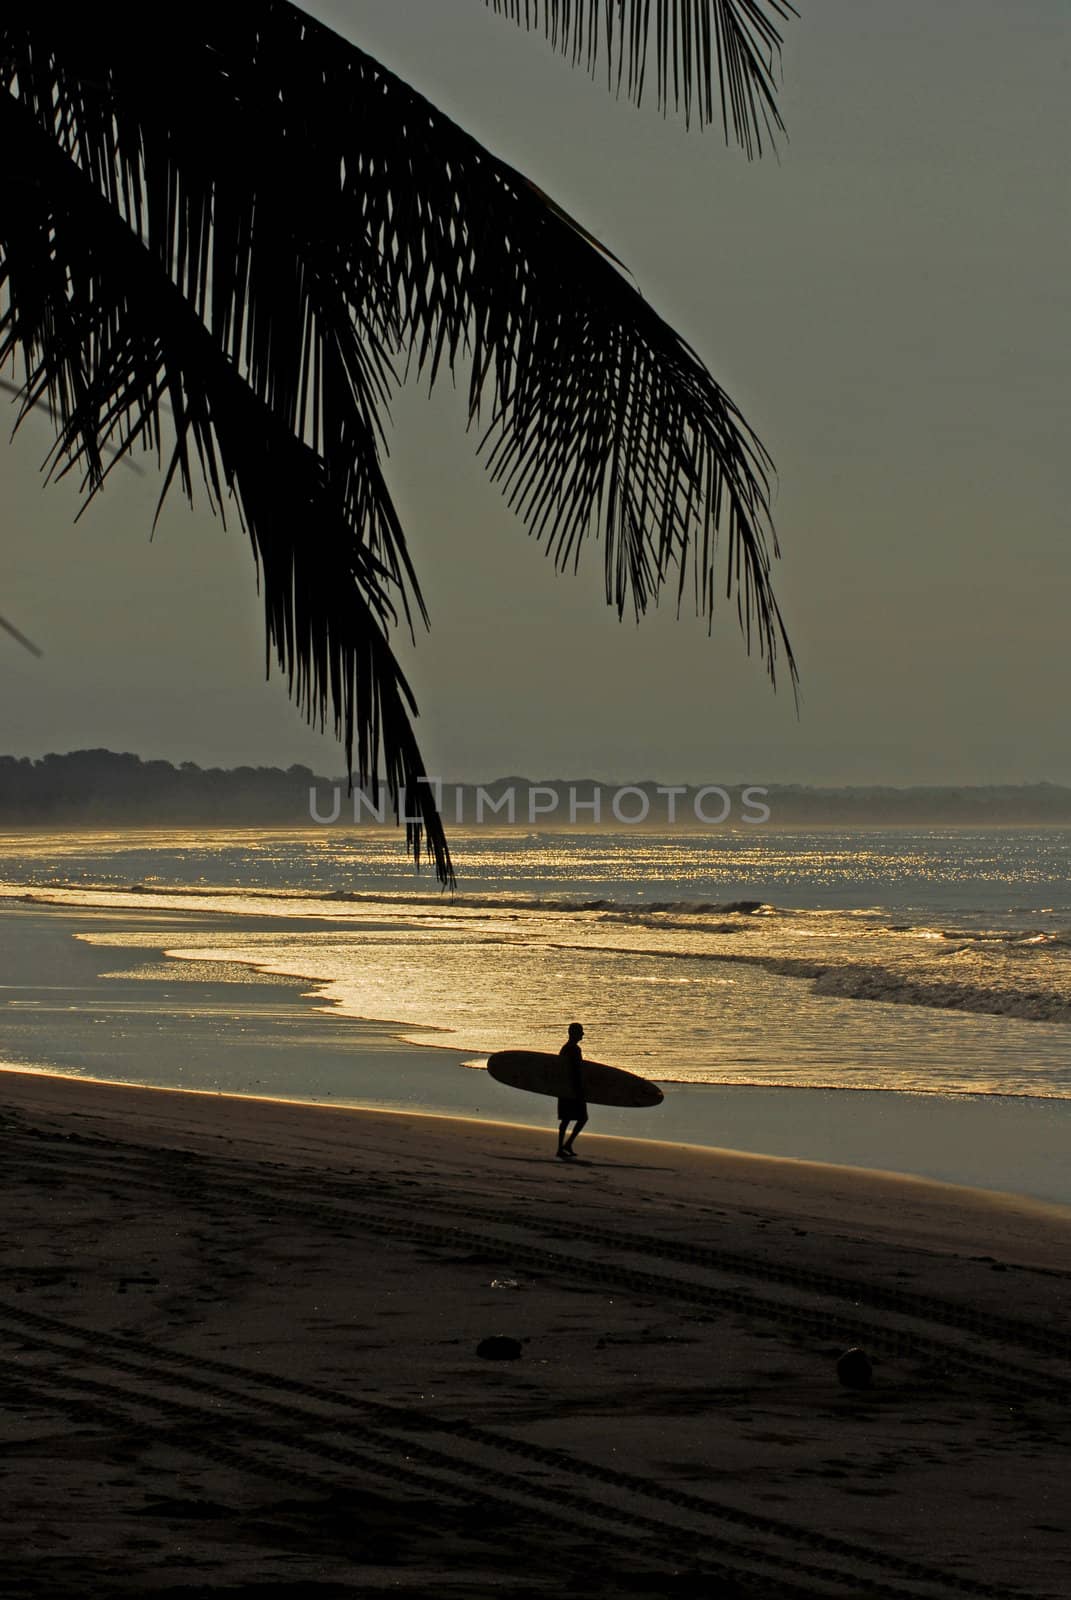 A man carrying his surfboard to the beach for early morning waves